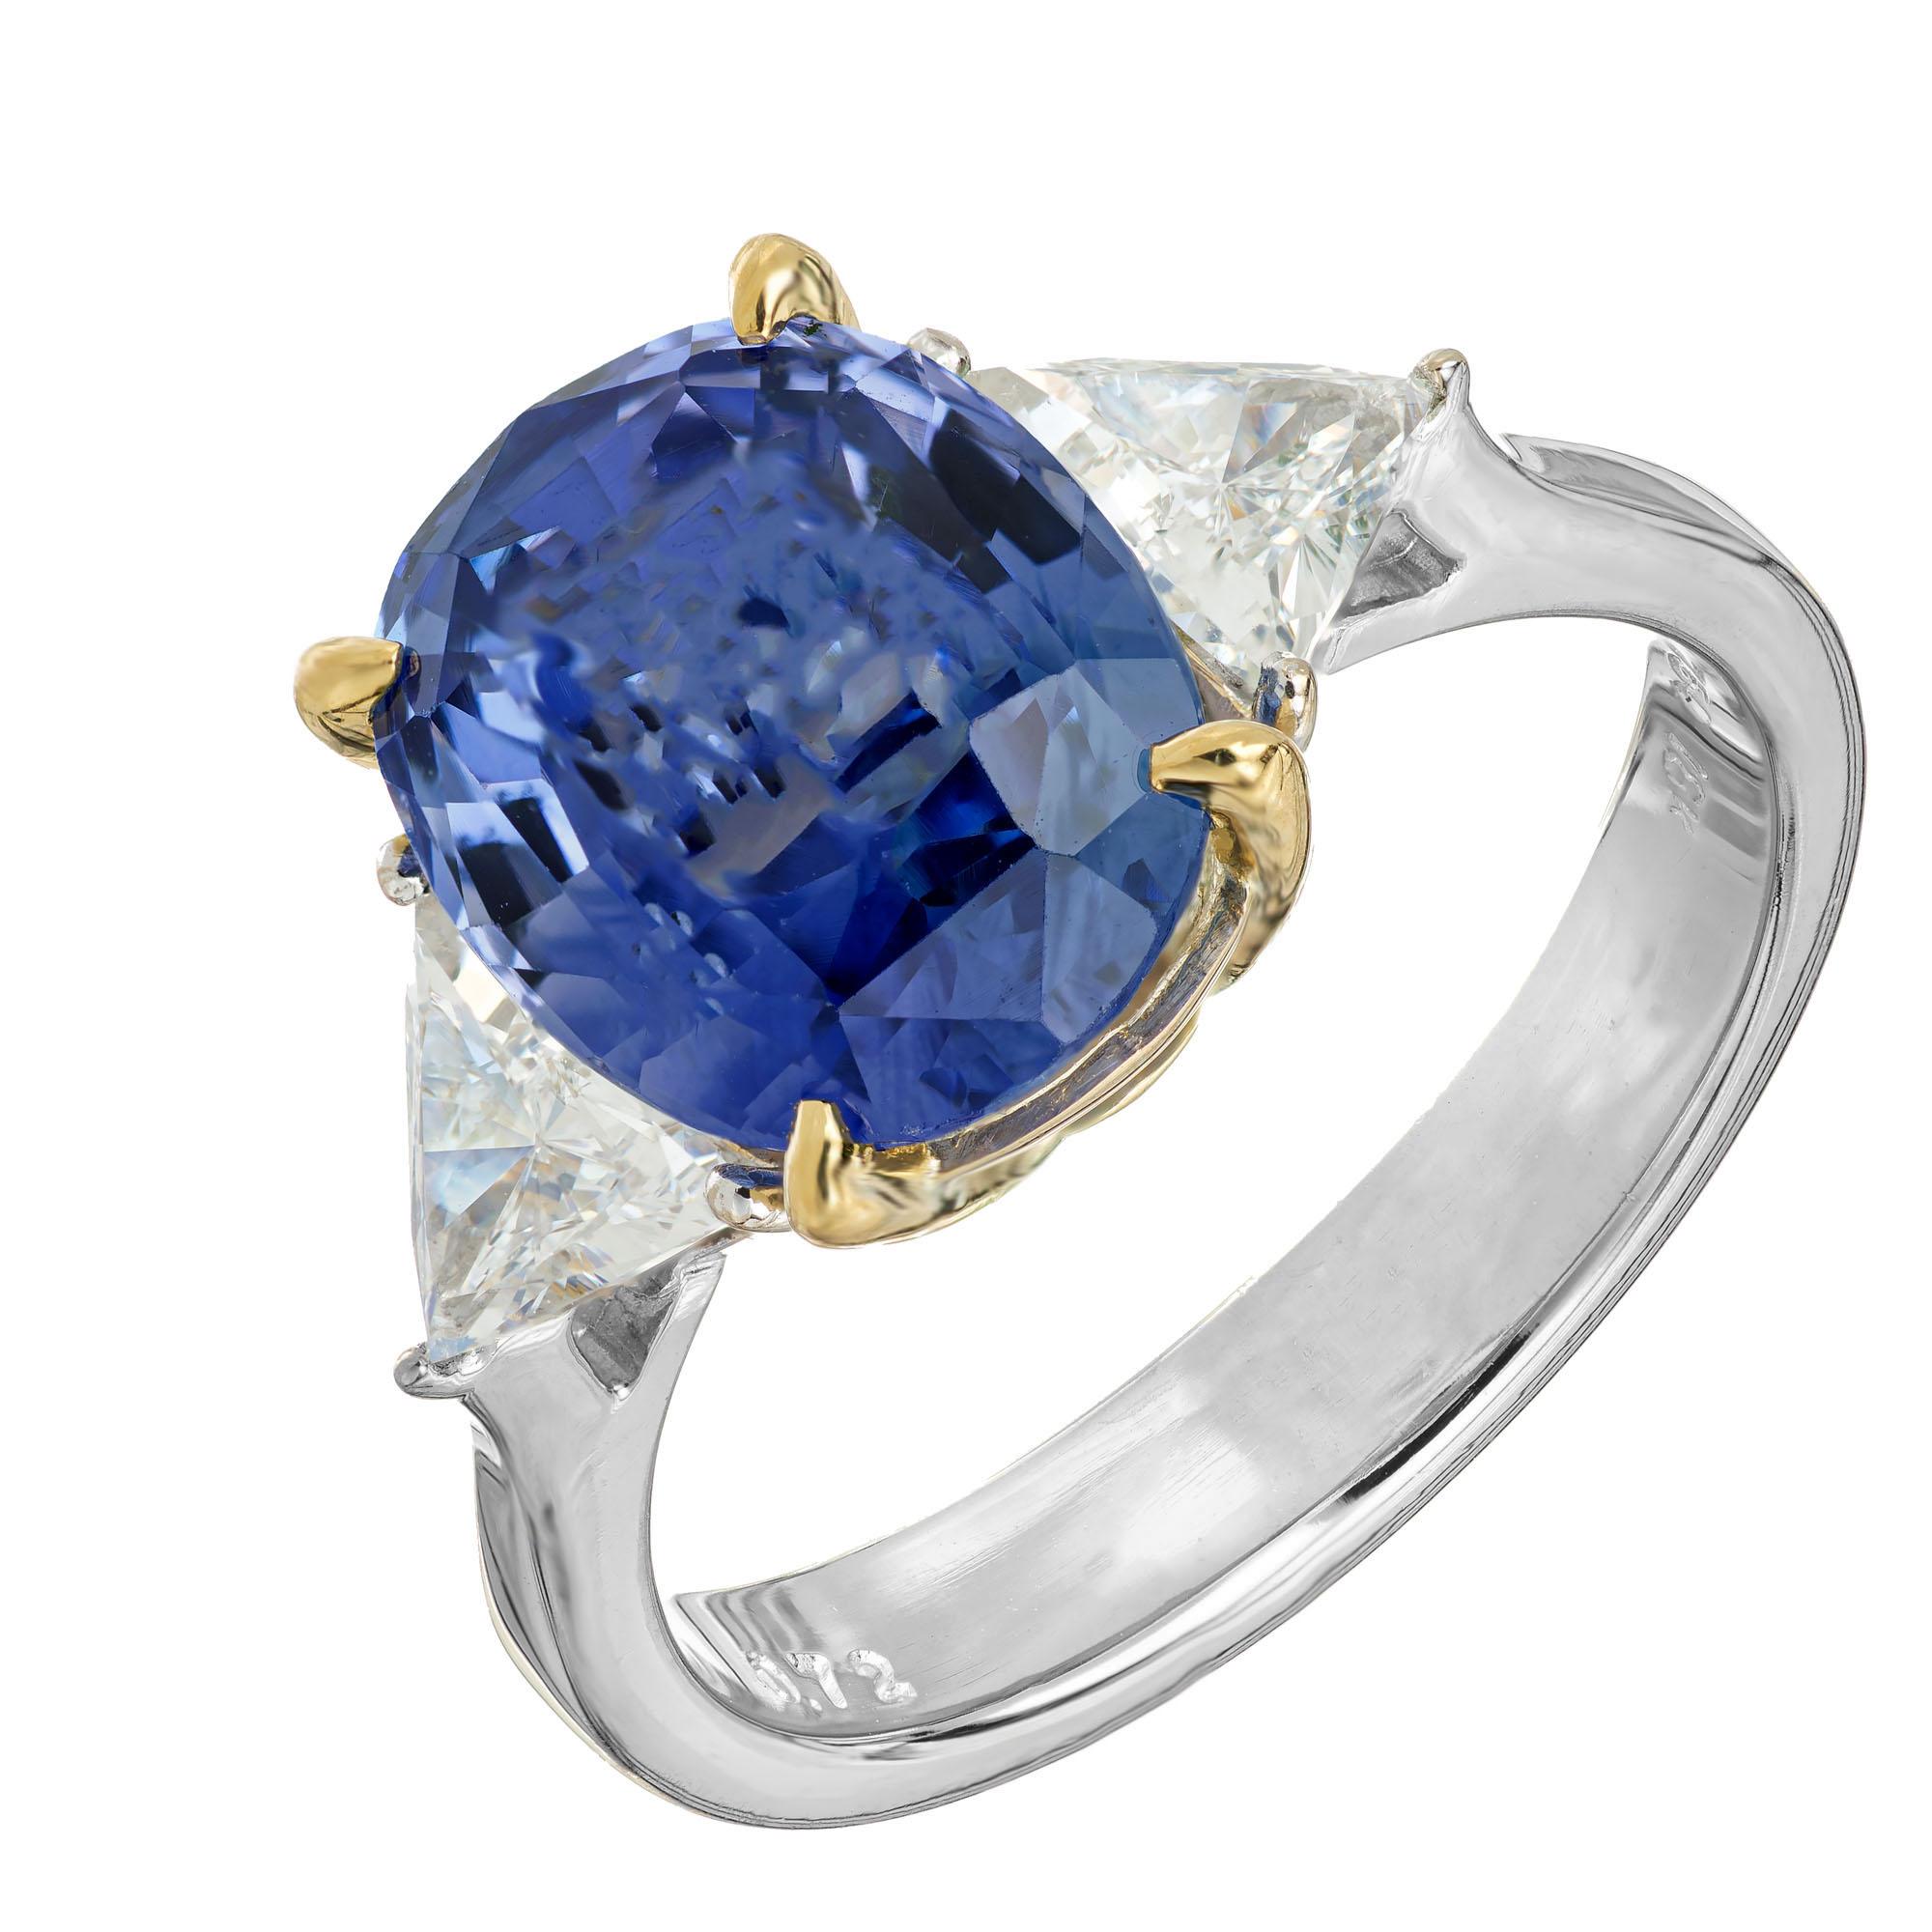 Sapphire and diamond engagement ring. 4.50ct oval AGL certified center cornflower sapphire, accented with tow trilliant cut side diamonds in a three-stone 18k yellow and white gold setting. AGL certified  natural simple heat only. 

1  medium